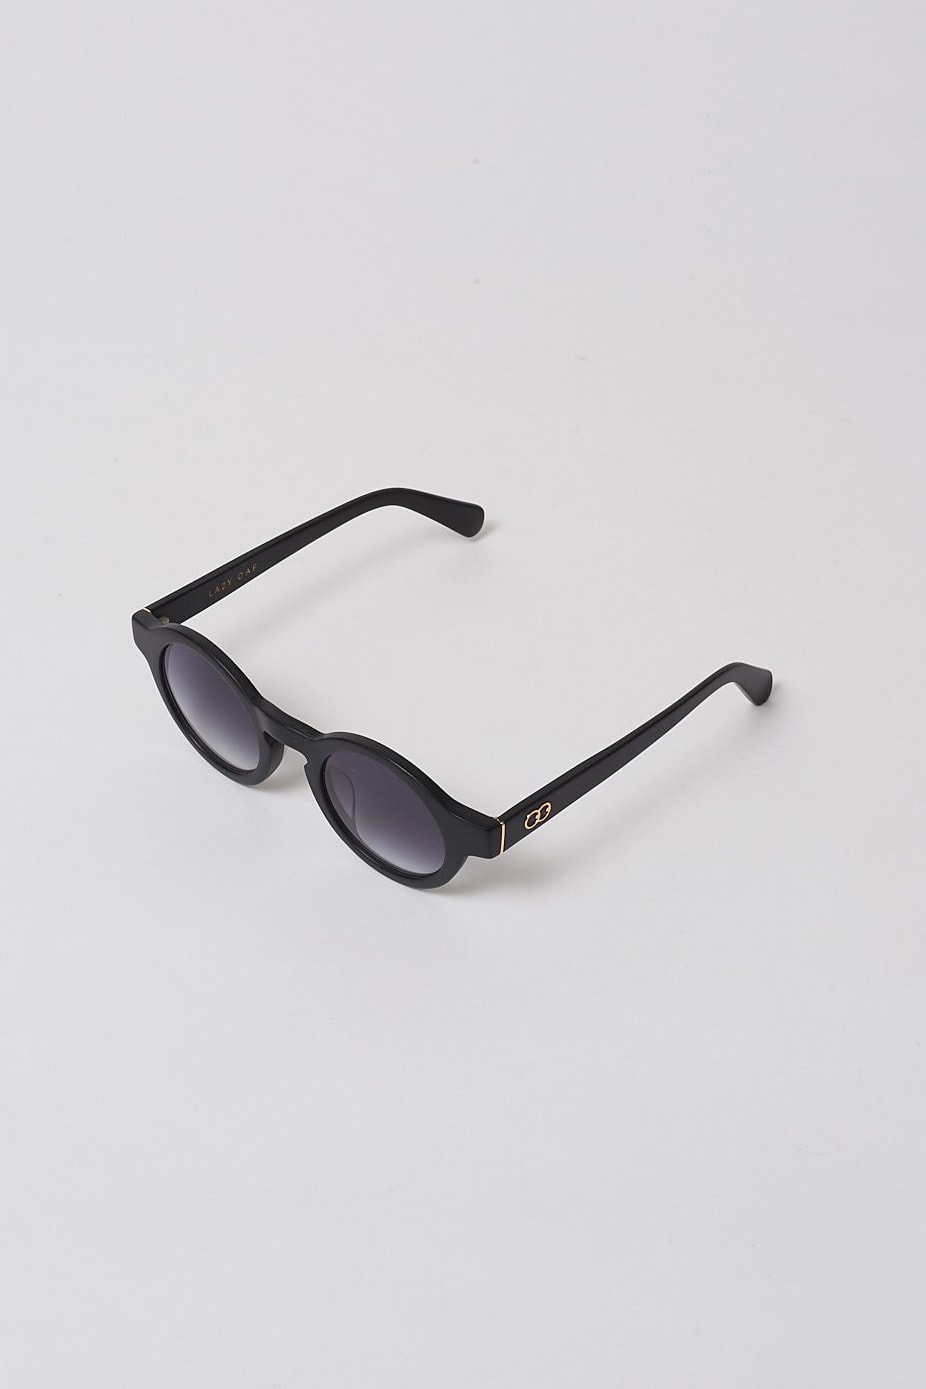 lazy oaf debut sunglasses collection london black round